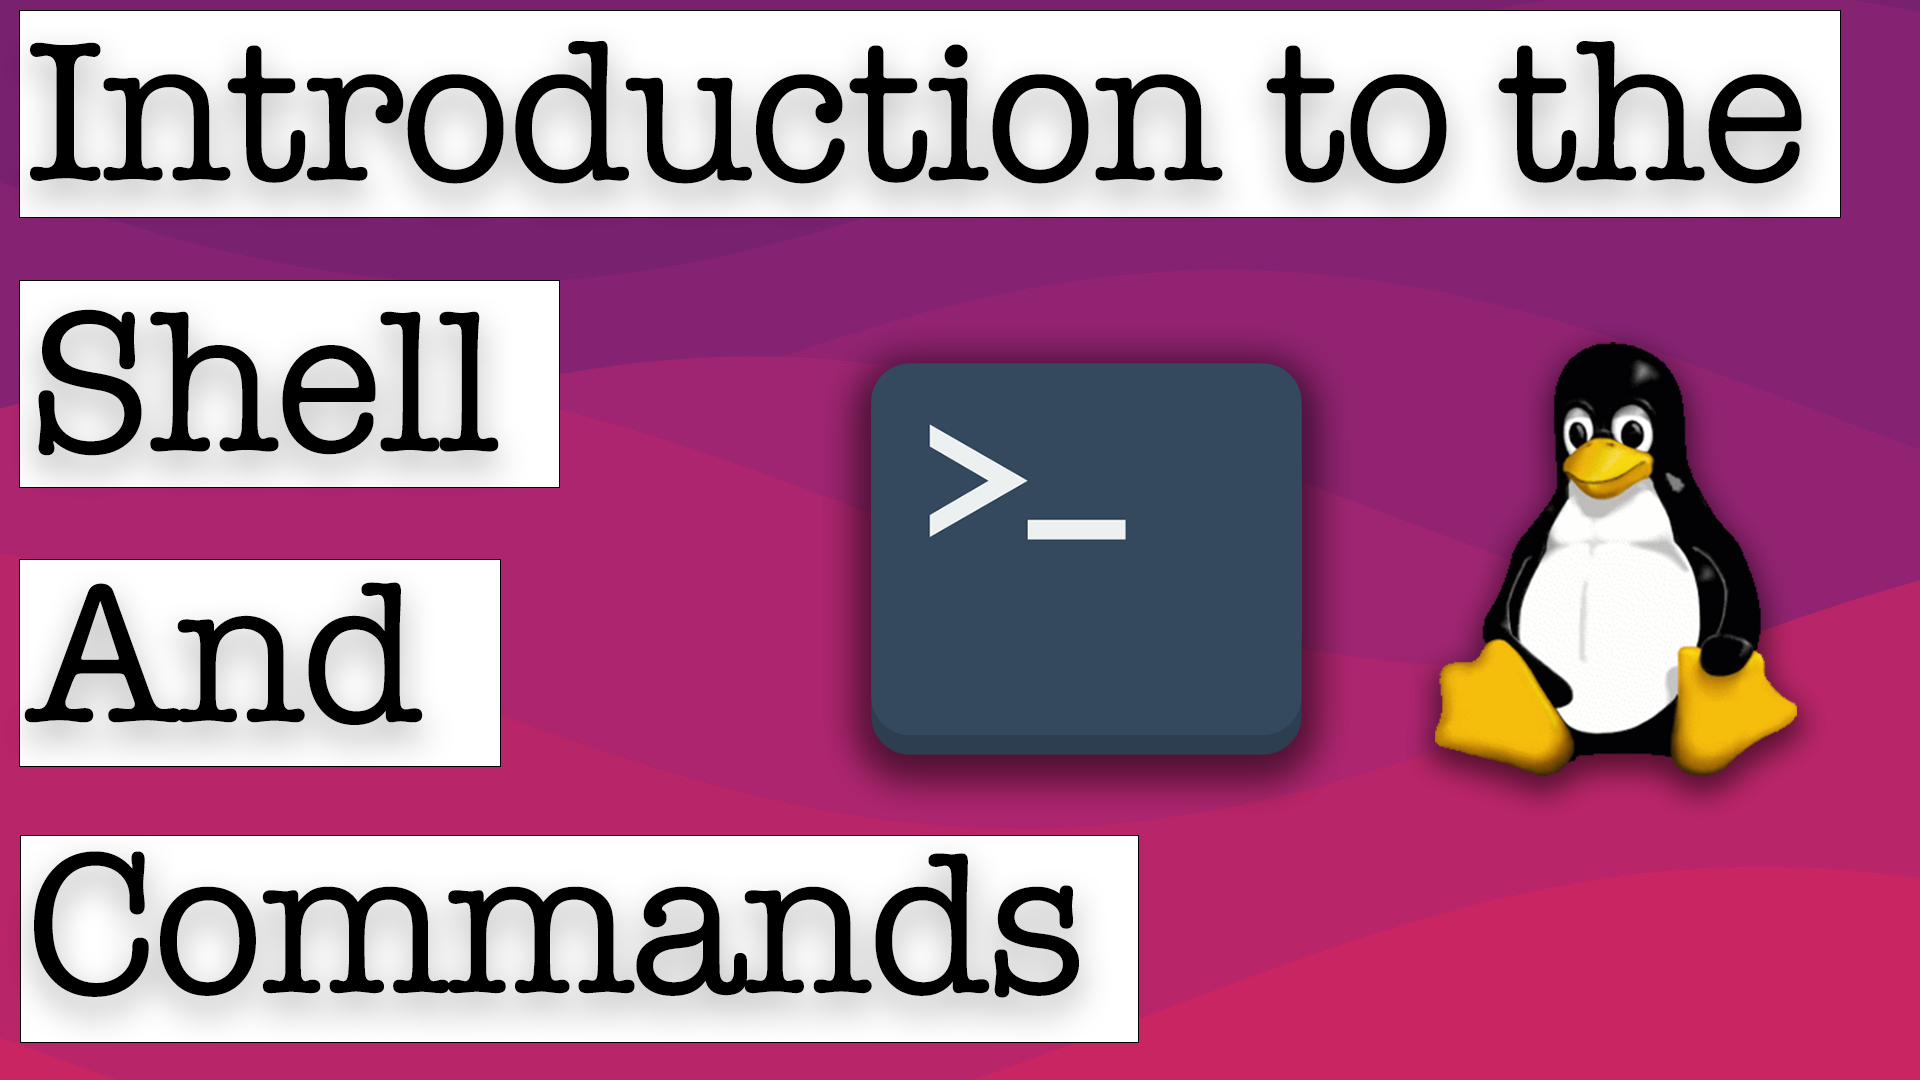 Introduction to Commands